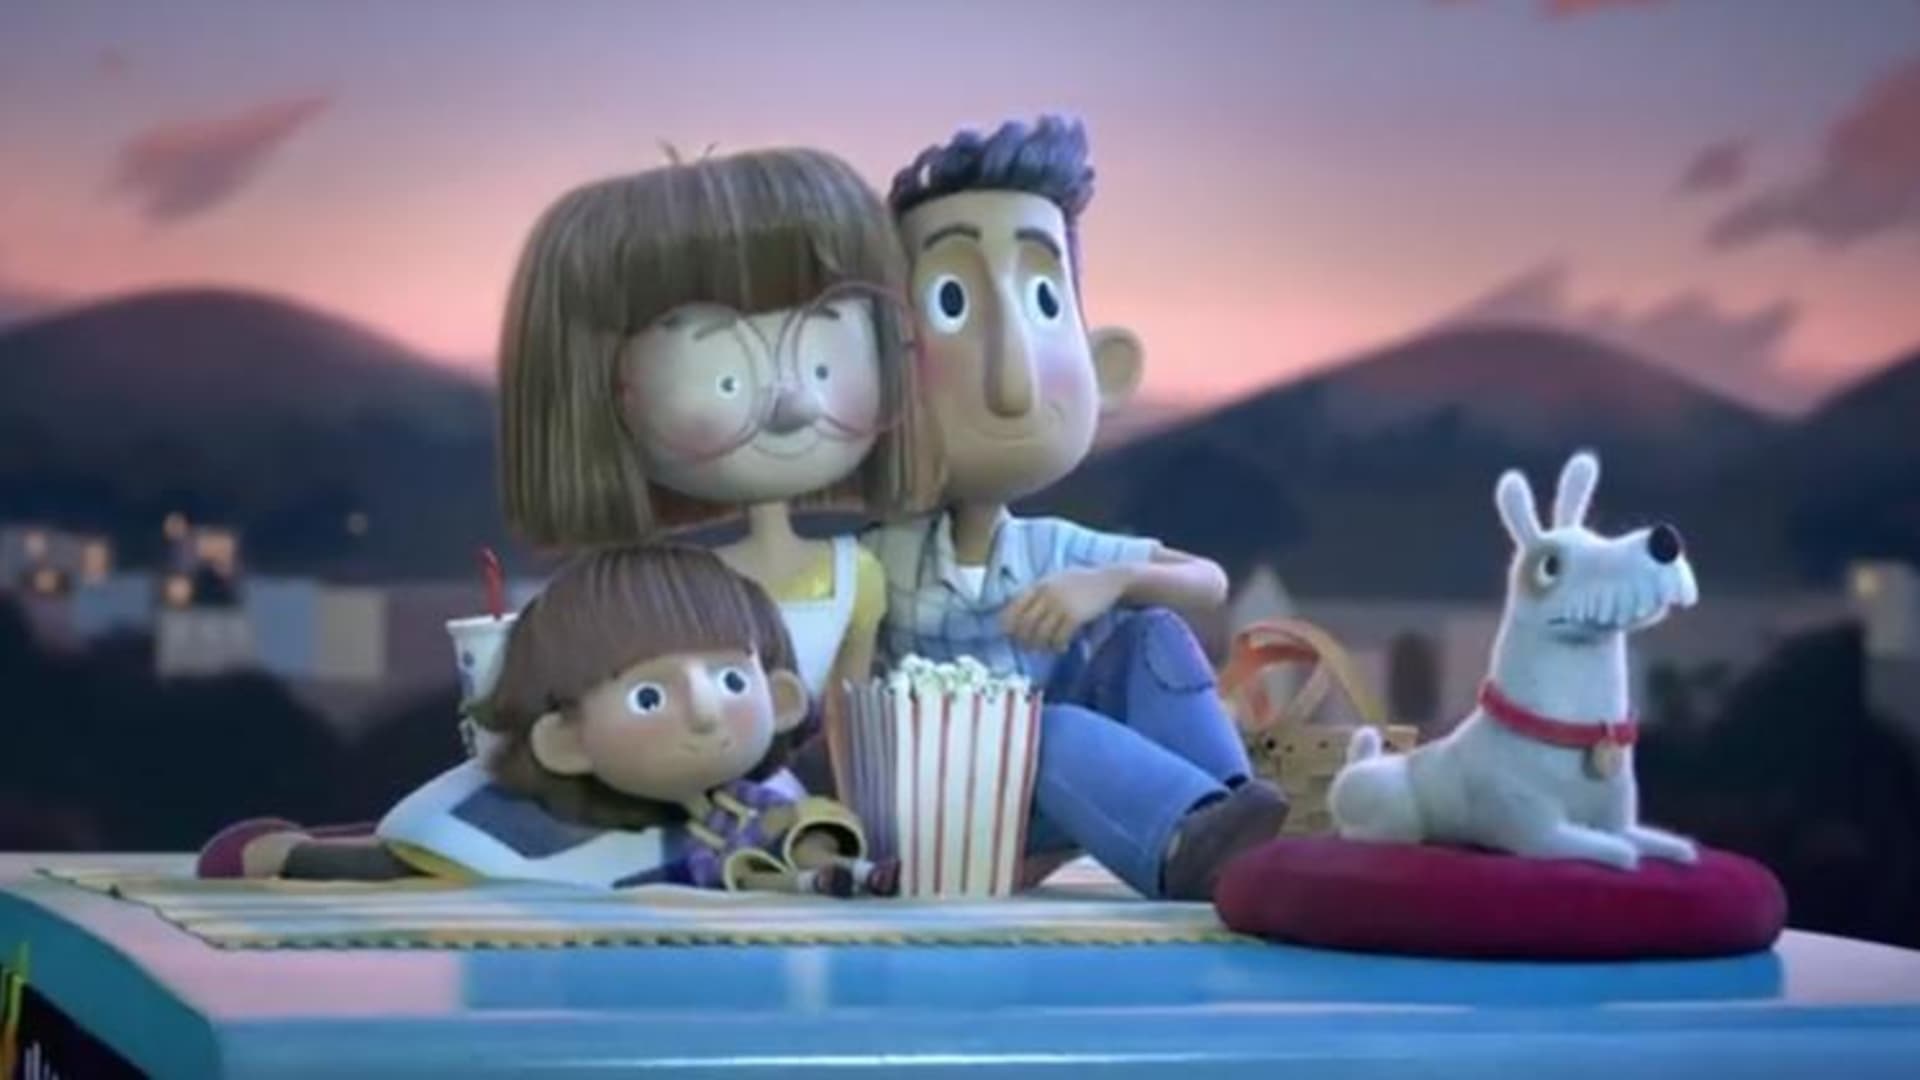 Chipotle's new animated ad slams rival fast food chains